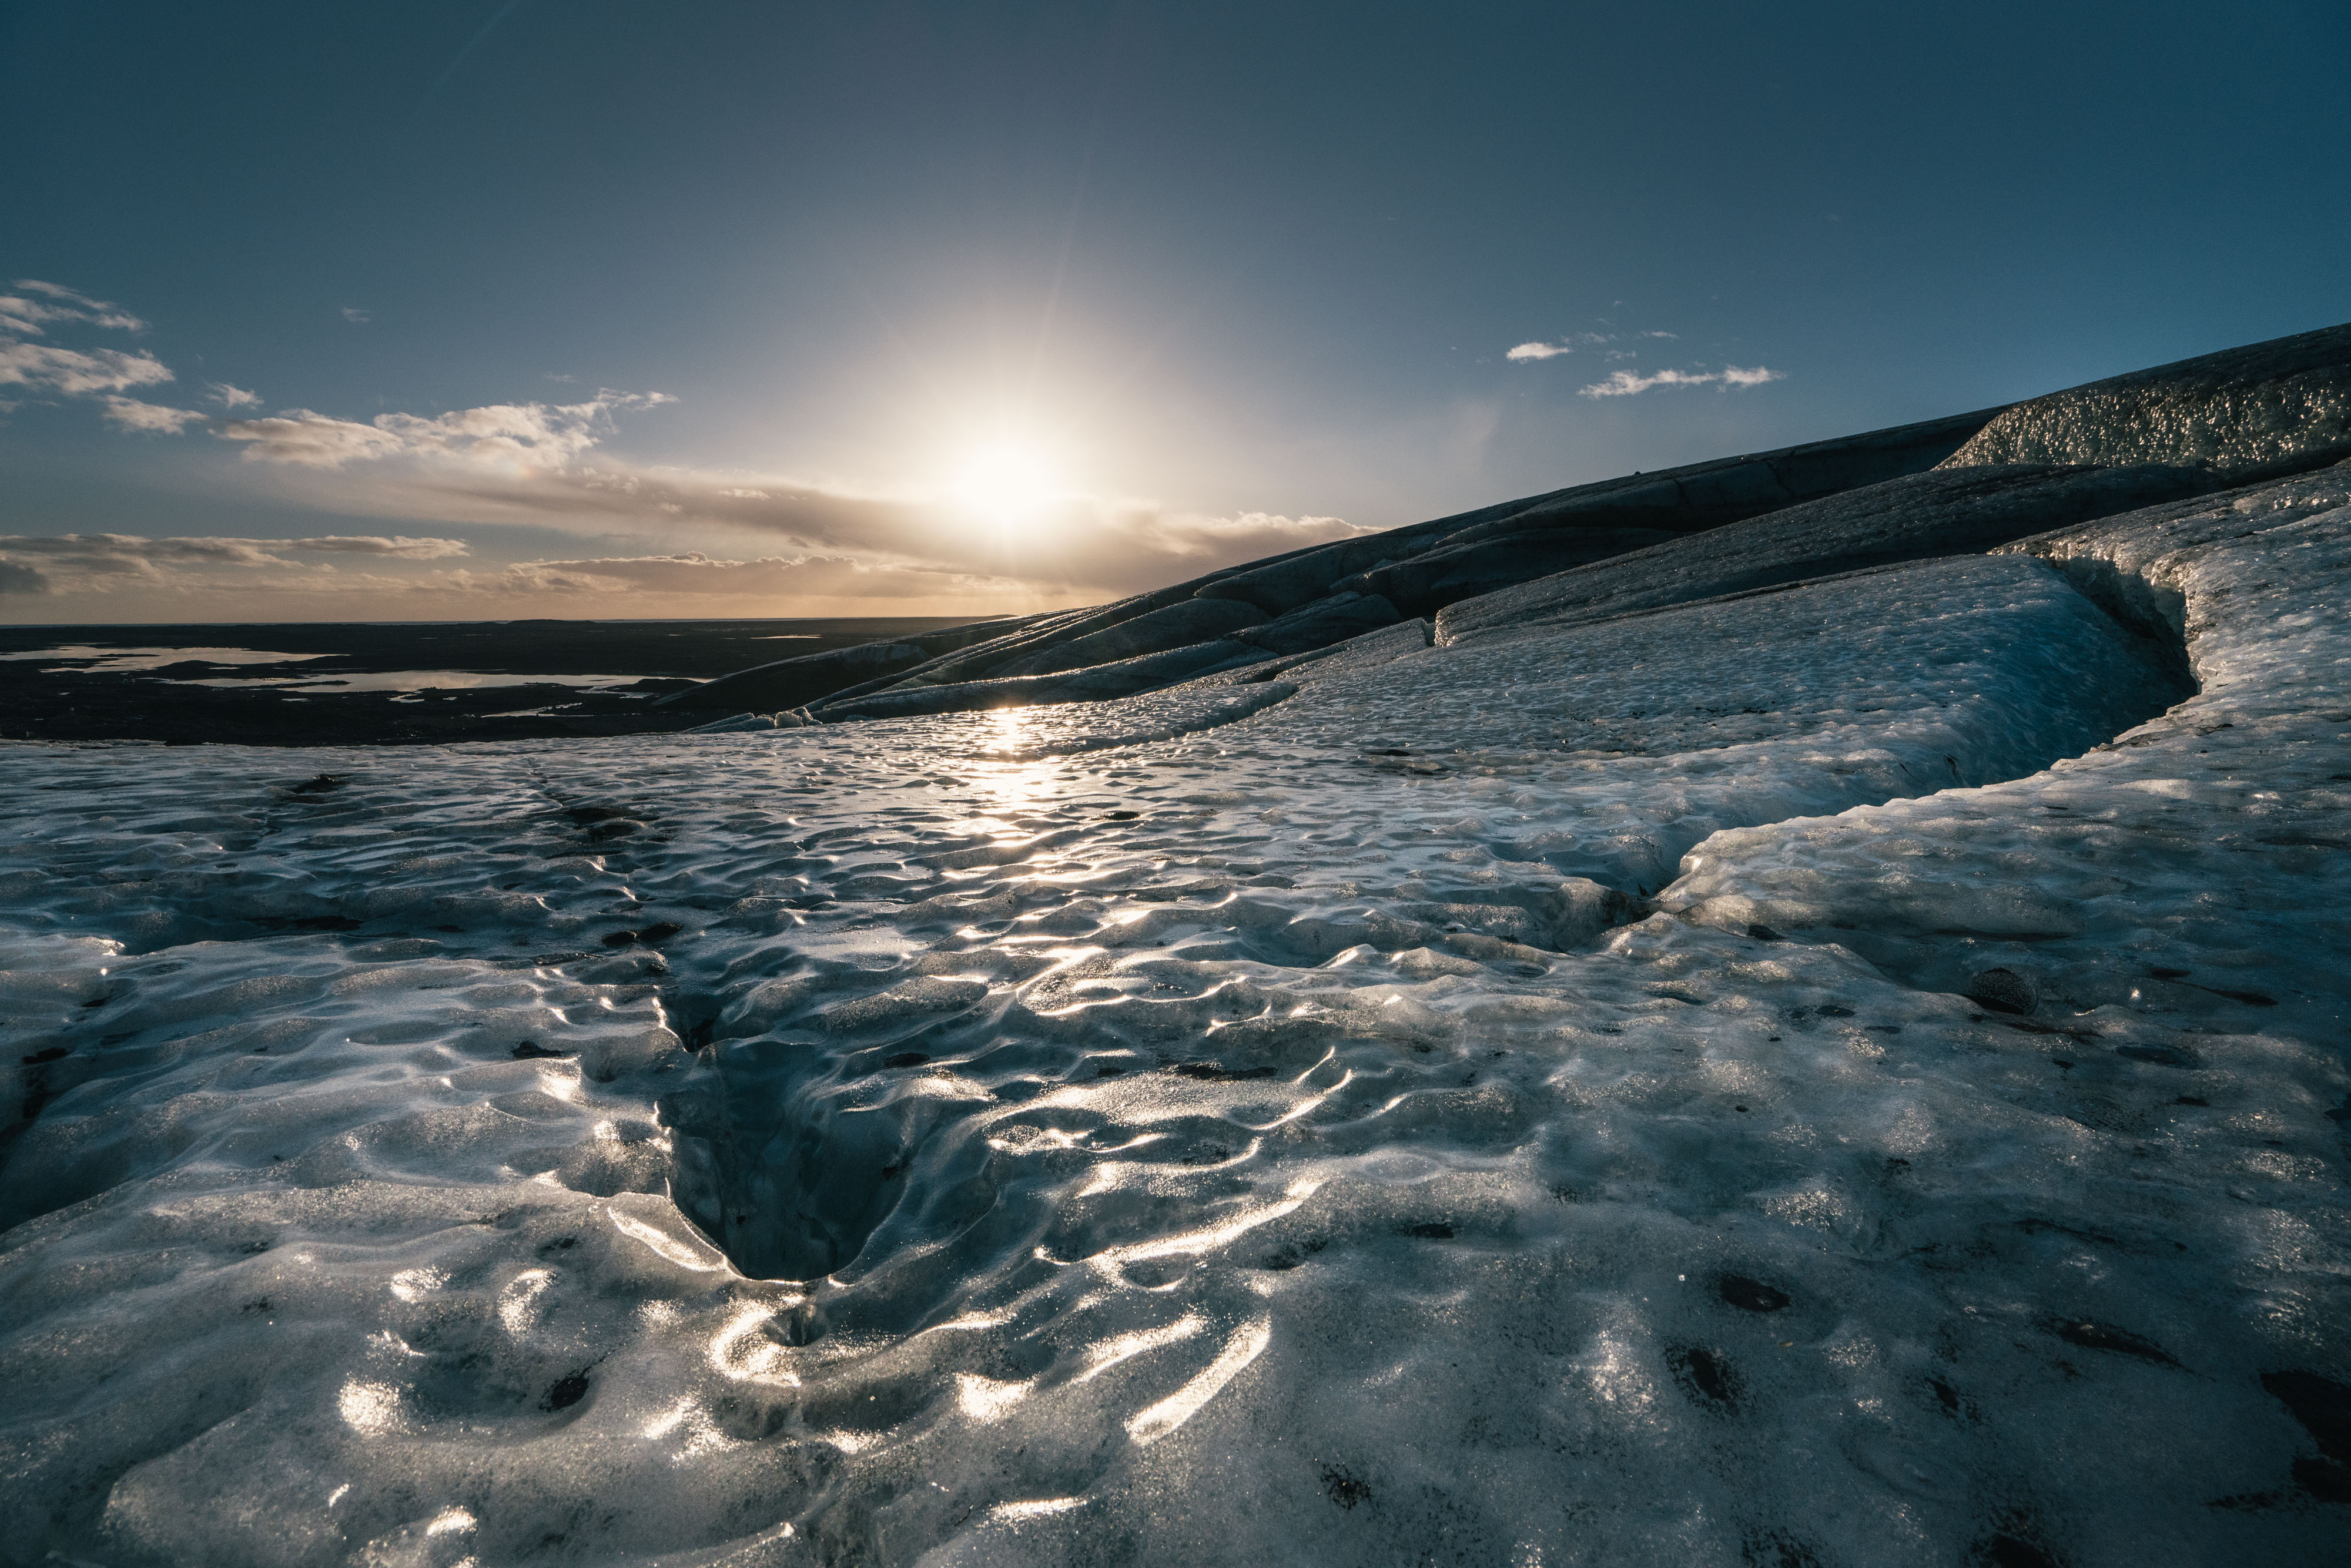 Wednesday 25th November 2015, Vatnajökull national park, Iceland: Photographer Mikael Buck with assistance from renowned local Icelandic guide Einar Runar Sigurdsson, explored the frozen world of Vatnajökull glacier in Iceland using Sonys world first back-illuminated full-frame sensor  which features in the ?7R II camera. His images were taken without use of a tripod or any image stitching techniques in photoshop. This was made possible through Sonys new sensor technology, allowing incredibly detailed low-light hand held photography. Previously images this detailed would have required carrying bulky equipment to the caves, some of which can require hiking and climbing over a glacier for up to two hours to to access. This picture: The view on top of the Vatnajökull glacier whilst hiking to access the caves PR Handout - editorial usage only. Photographer's details not to be removed from metadata or byline. For further information please contact Rochelle Collison at Hope & Glory PR on 020 7014 5306 or rochelle.collison@hopeandglorypr.com Copyright: © Mikael Buck / Sony 07828 201 042 / mikaelbuck@gmail.com